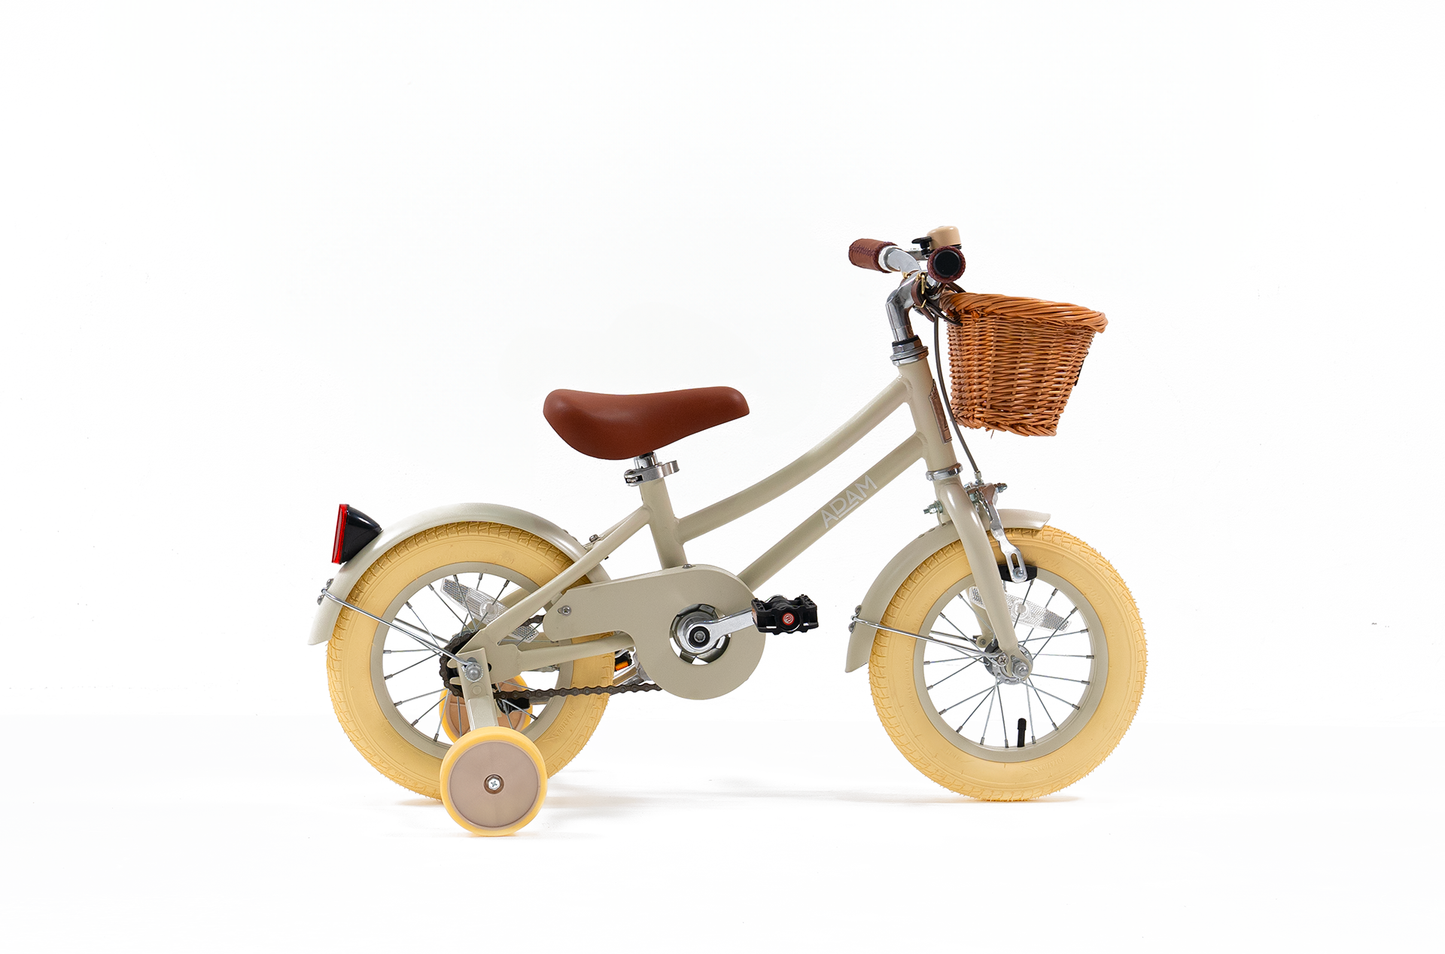 The little Adam 12" - Pedal bike for toddlers